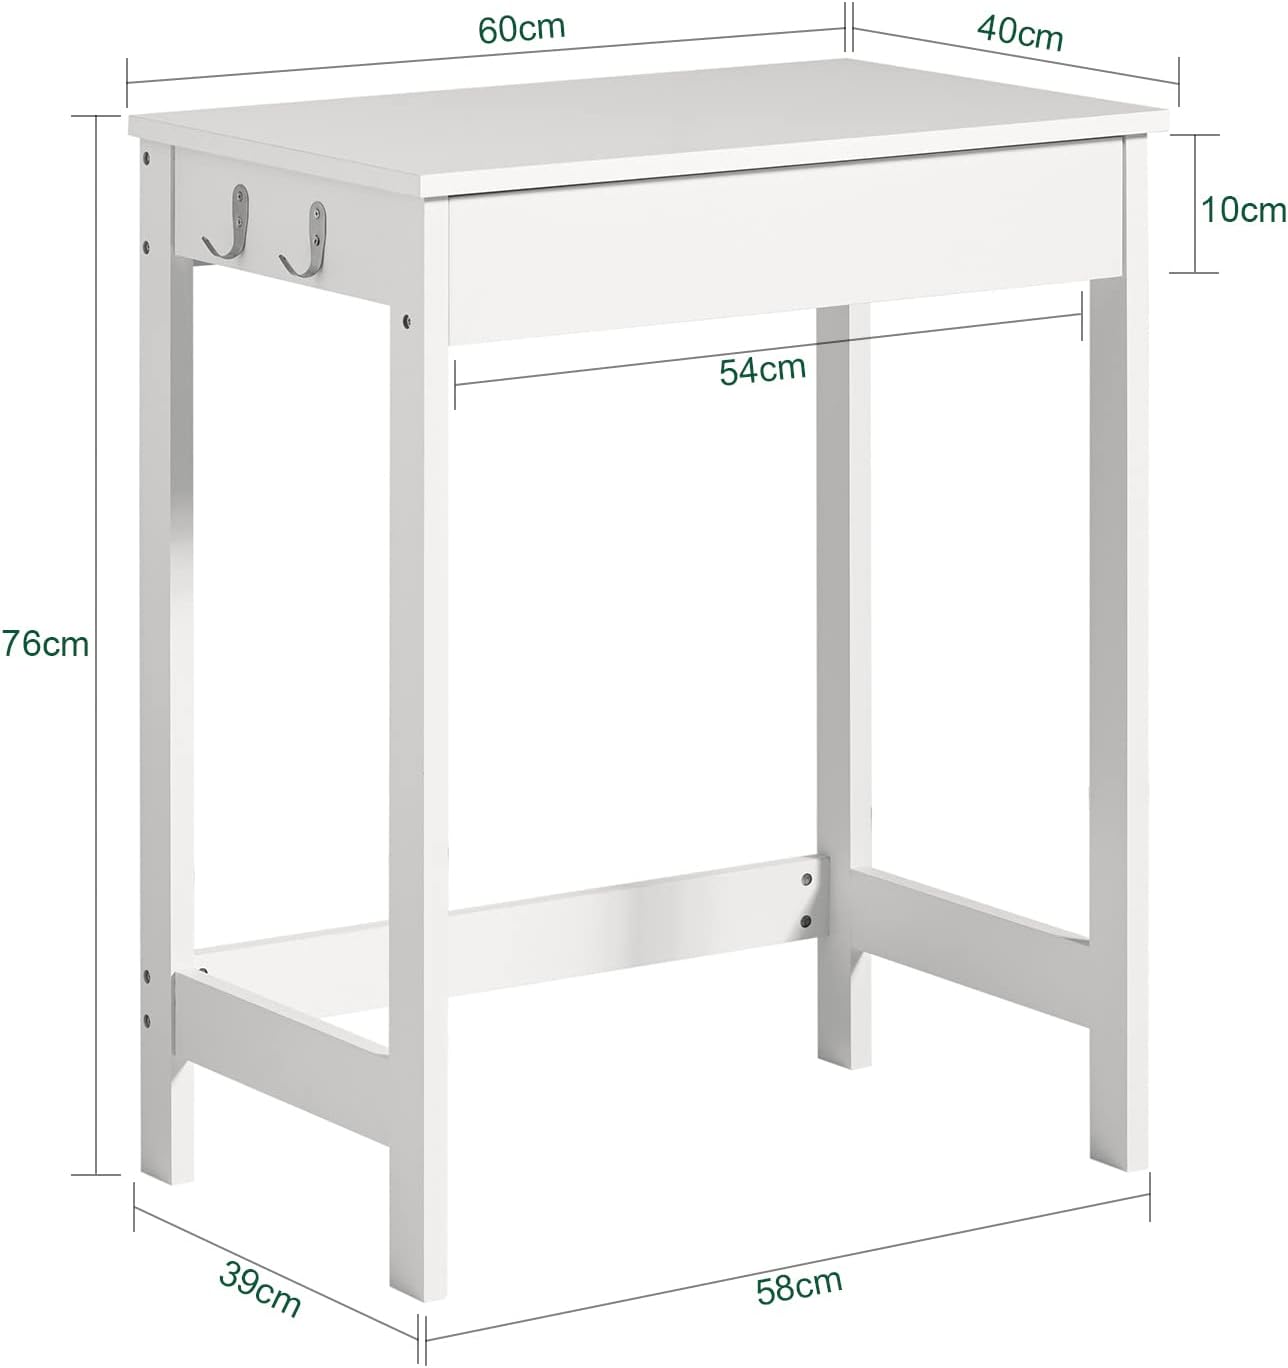 Small White Desk with Drawer Hooks